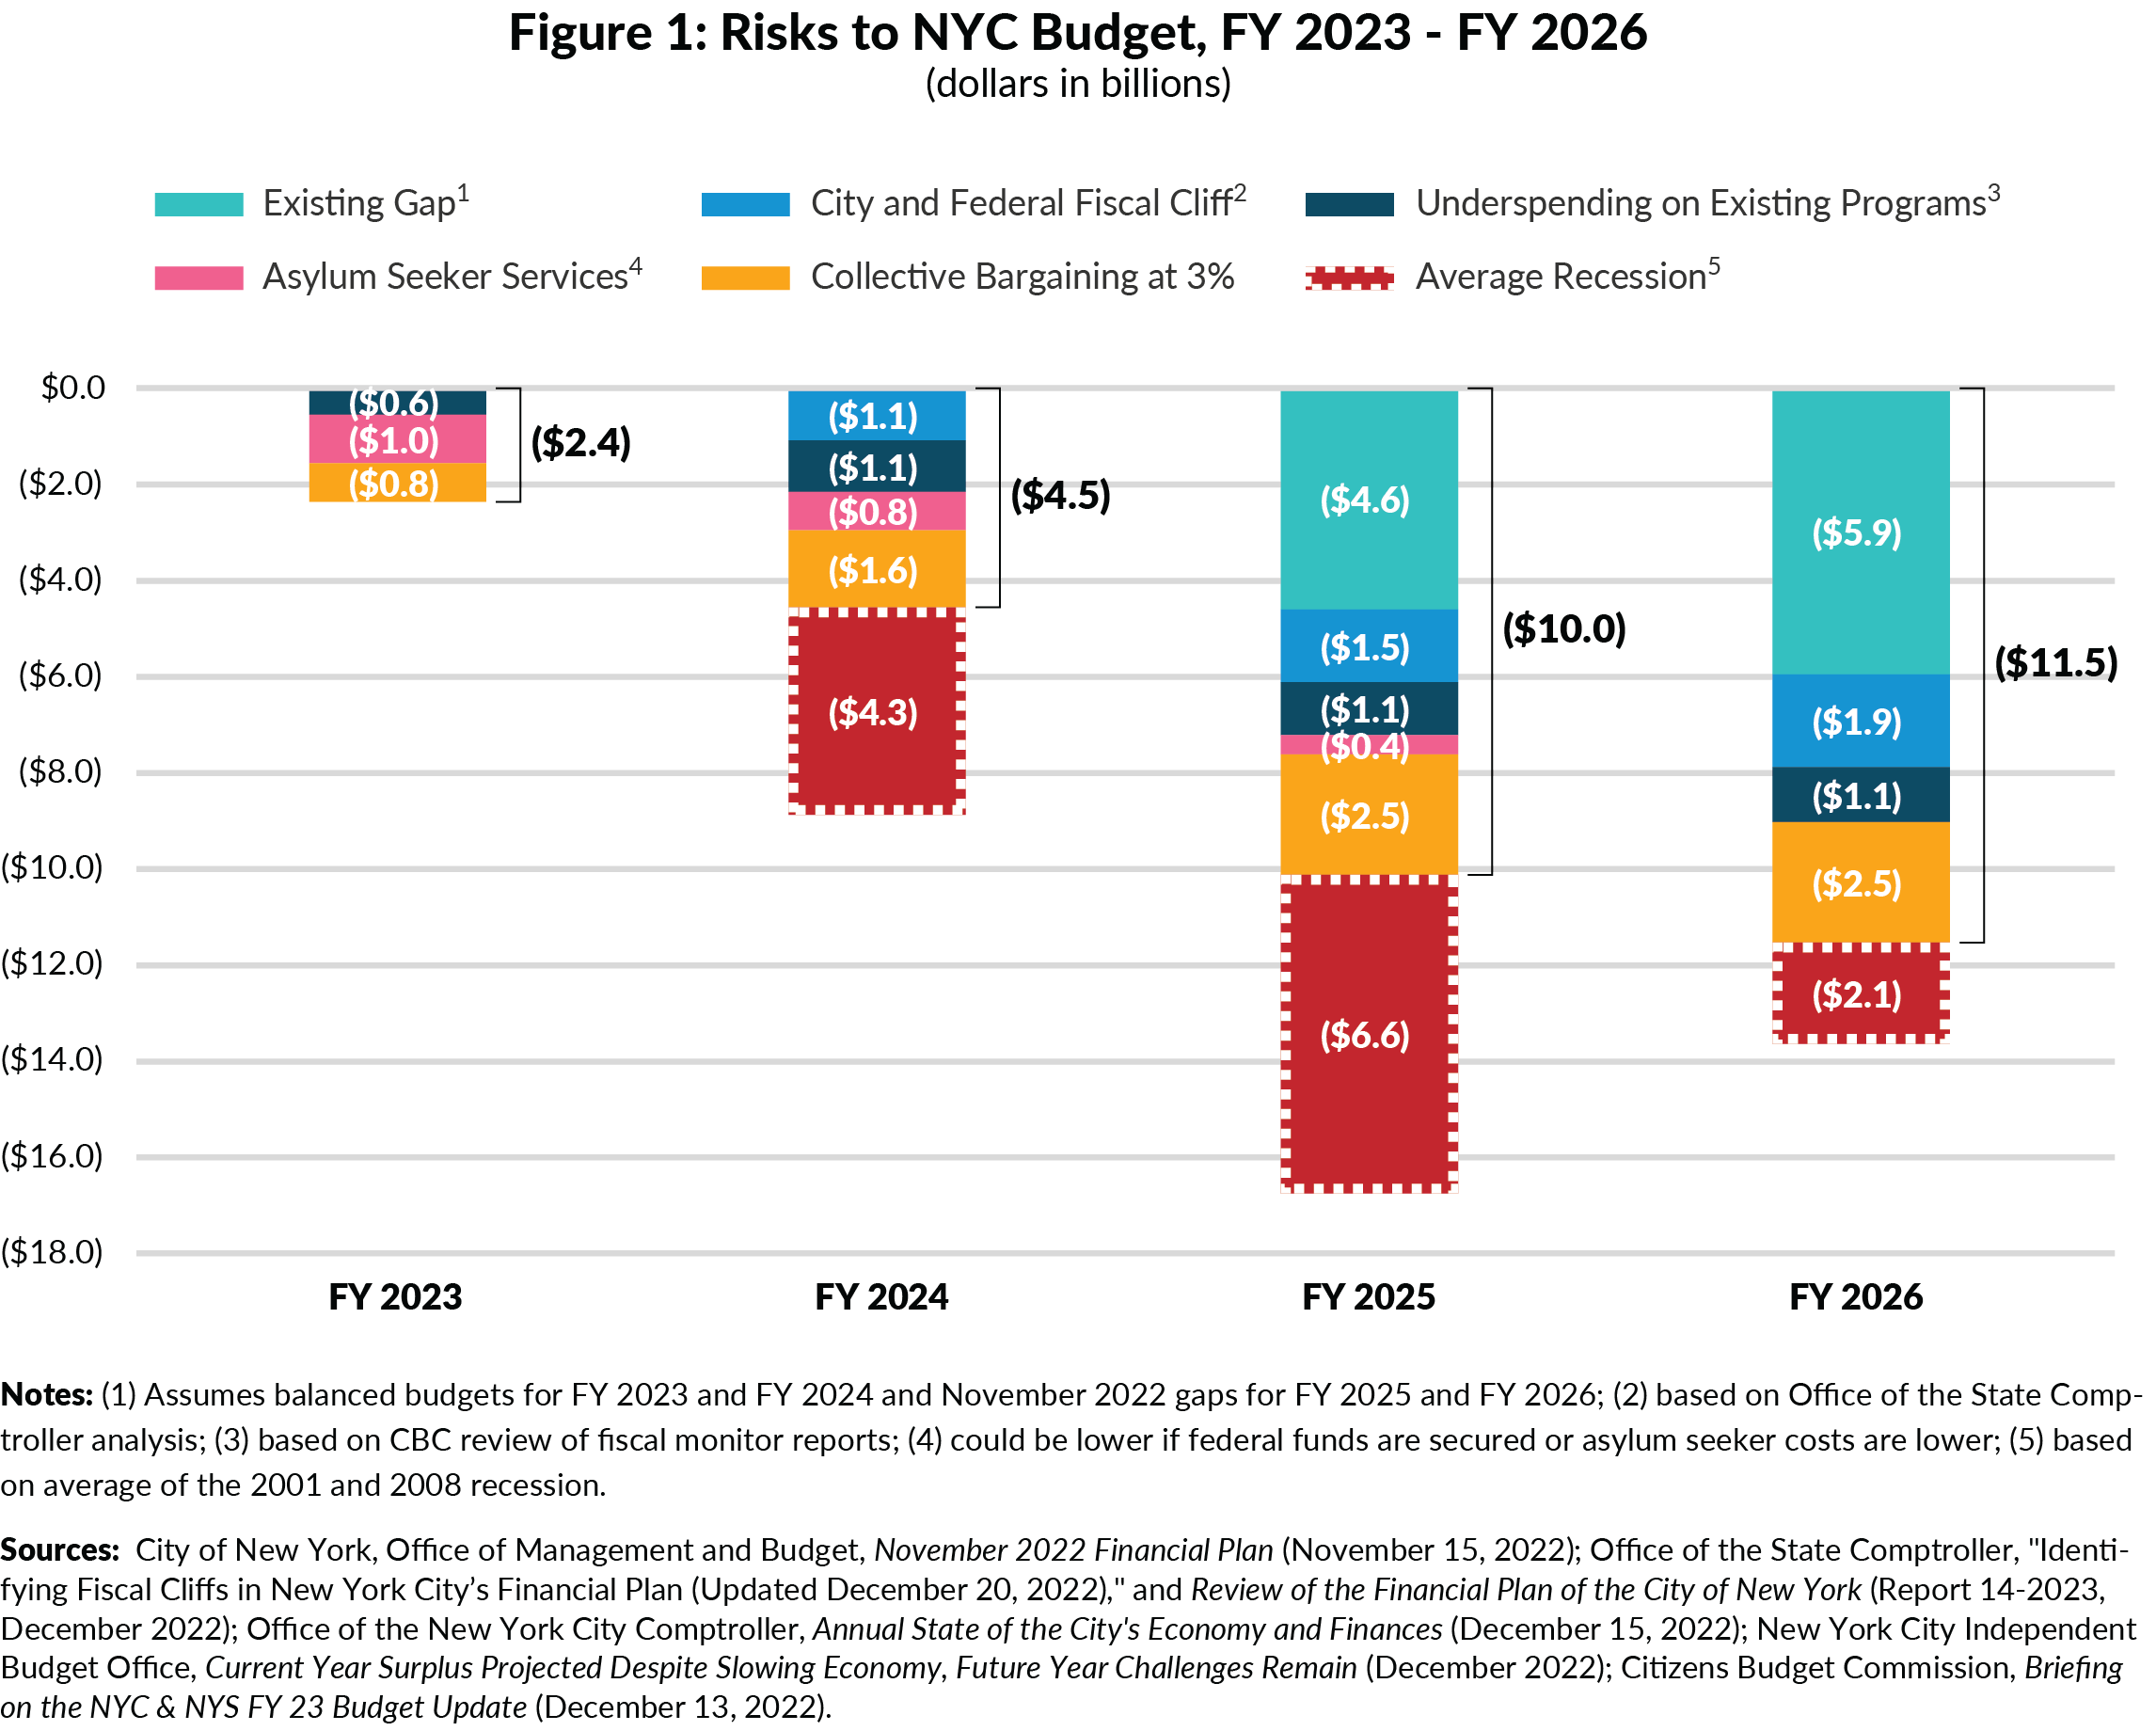 Figure 1: Risks to NYC Budget, FY 2023 - FY 2026